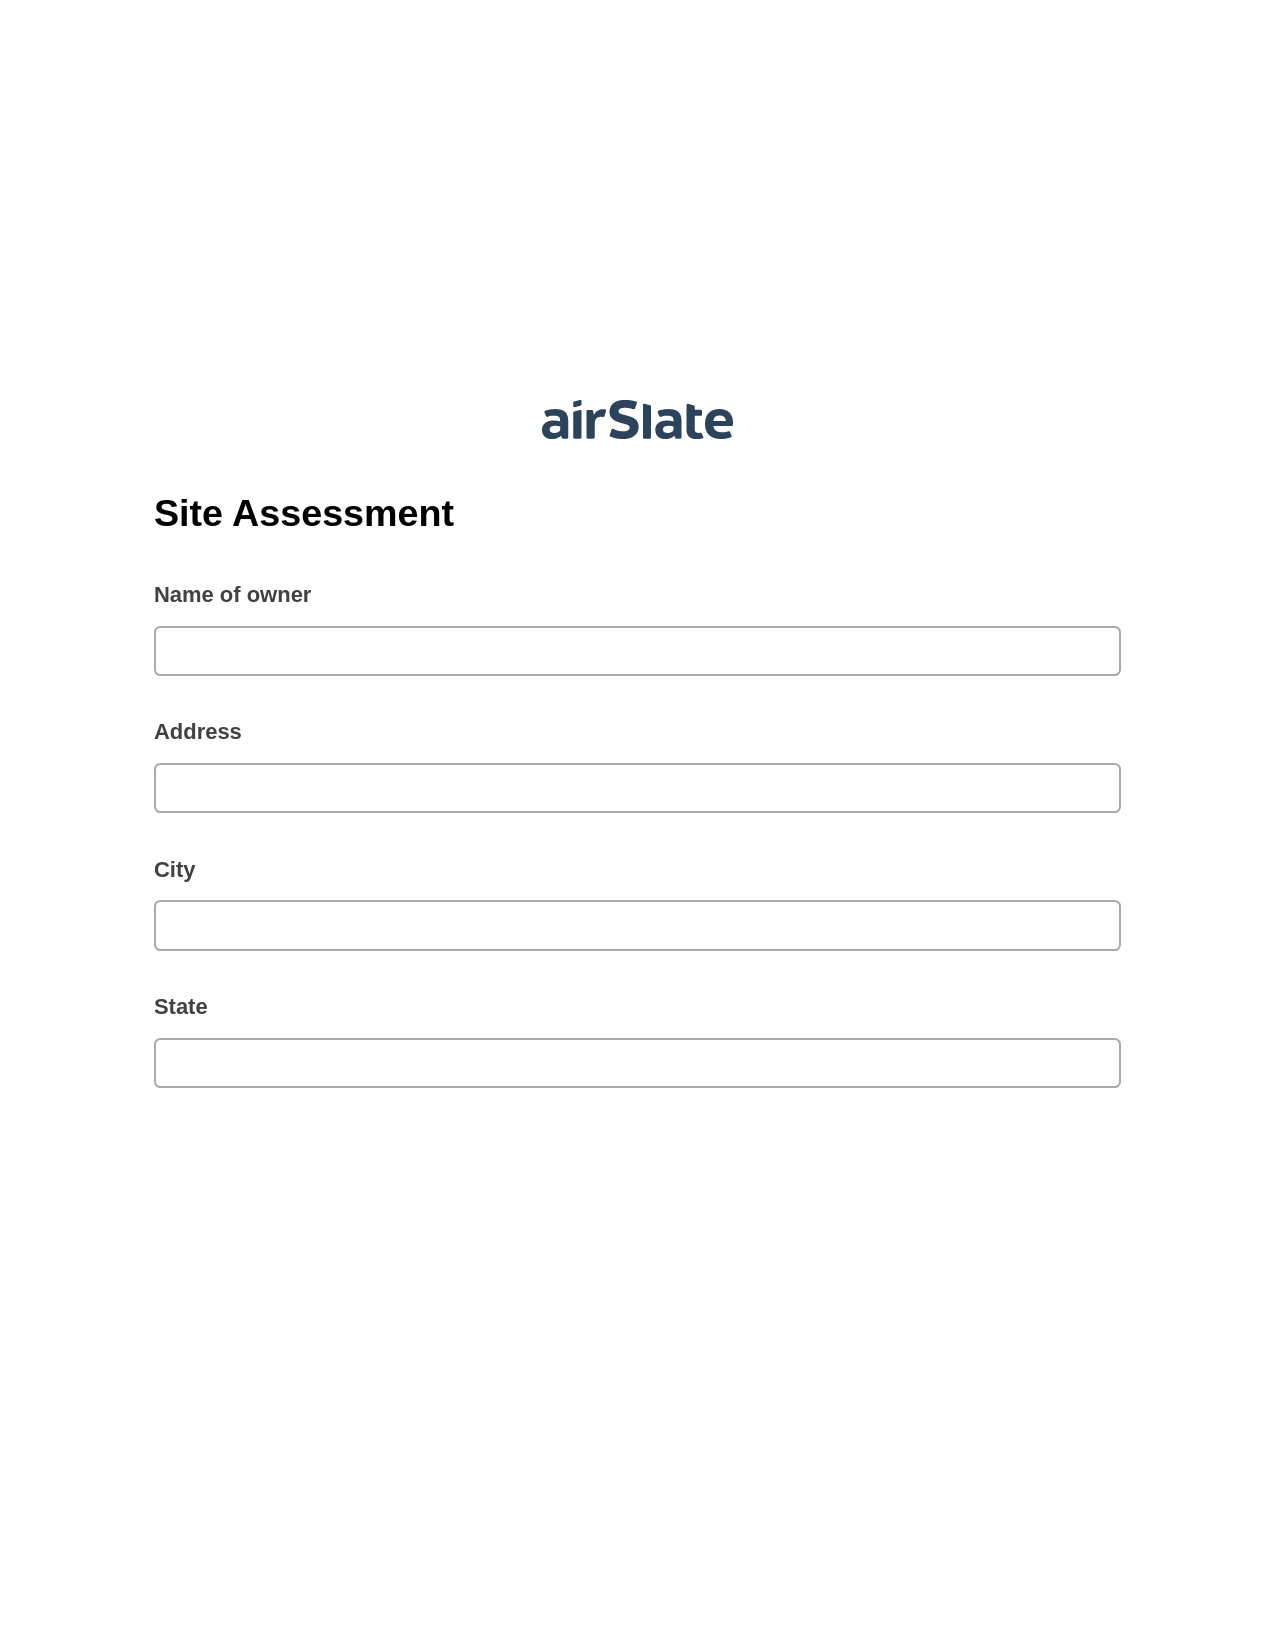 Site Assessment Pre-fill from Excel Spreadsheet Bot, Google Cloud Print Bot, Archive to SharePoint Folder Bot